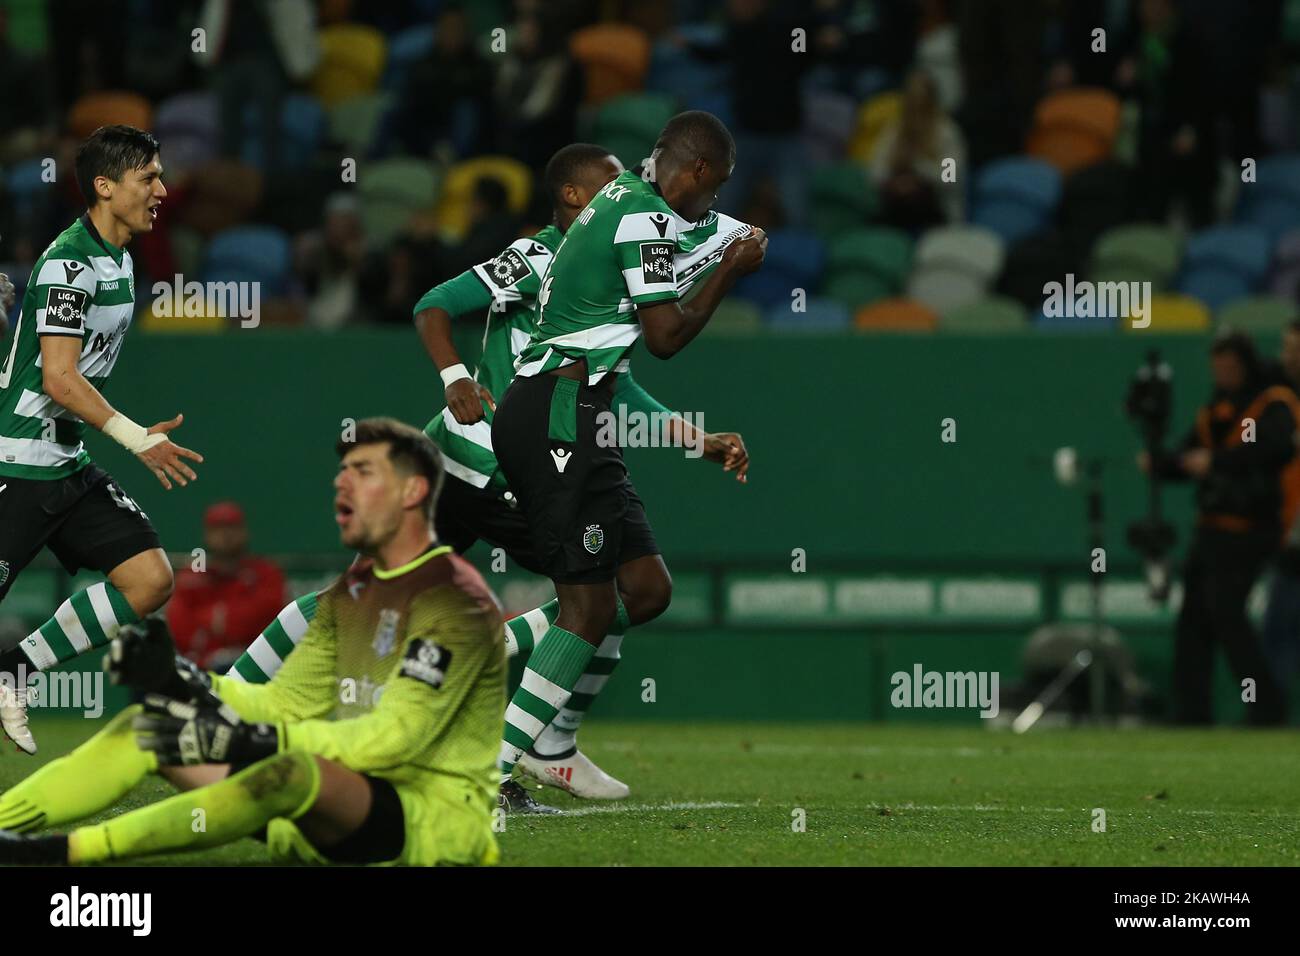 Sporting CP midfielder William Carvalho from Portugal celebrating after scoring a goal during the Premier League 2017/18 match between Sporting CP and CD Feirense at Estadio Jose Alvalade on February 11, 2018 in Lisbon, Portugal. (Photo by Bruno Barros / DPI / NurPhoto) Stock Photo